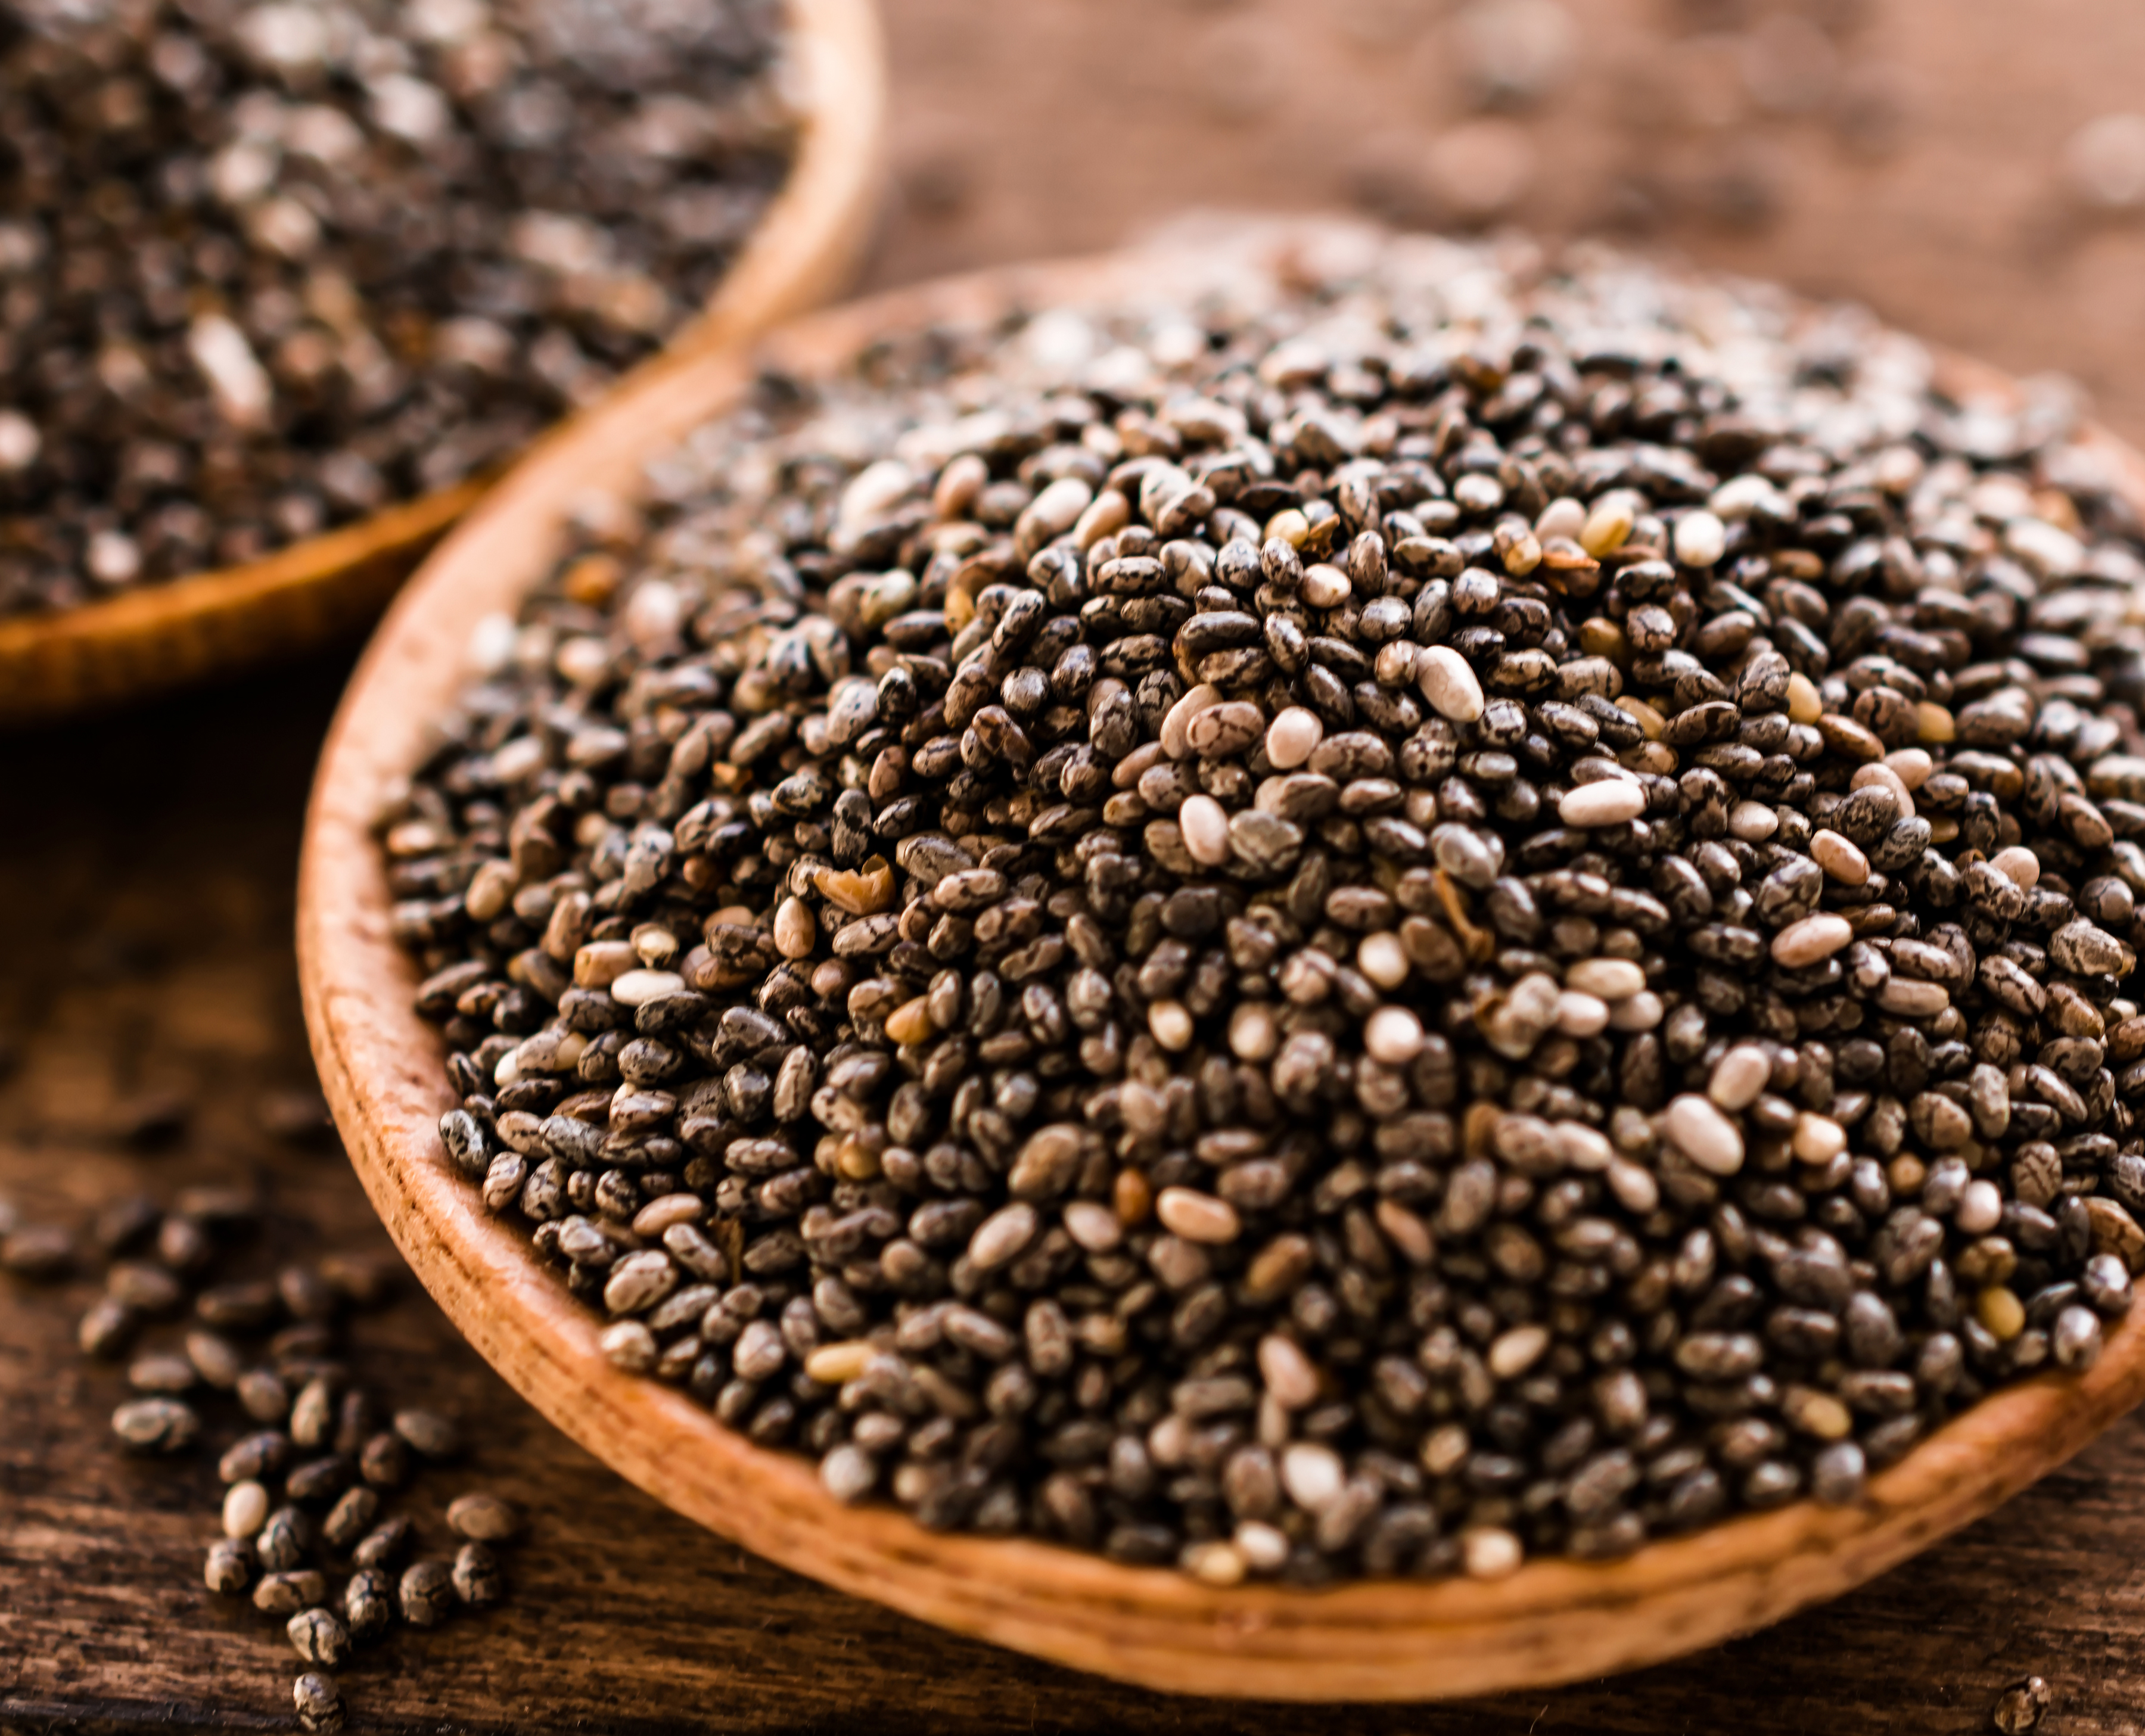 Can Eating Too Many Chia Seeds Cause Side Effects?